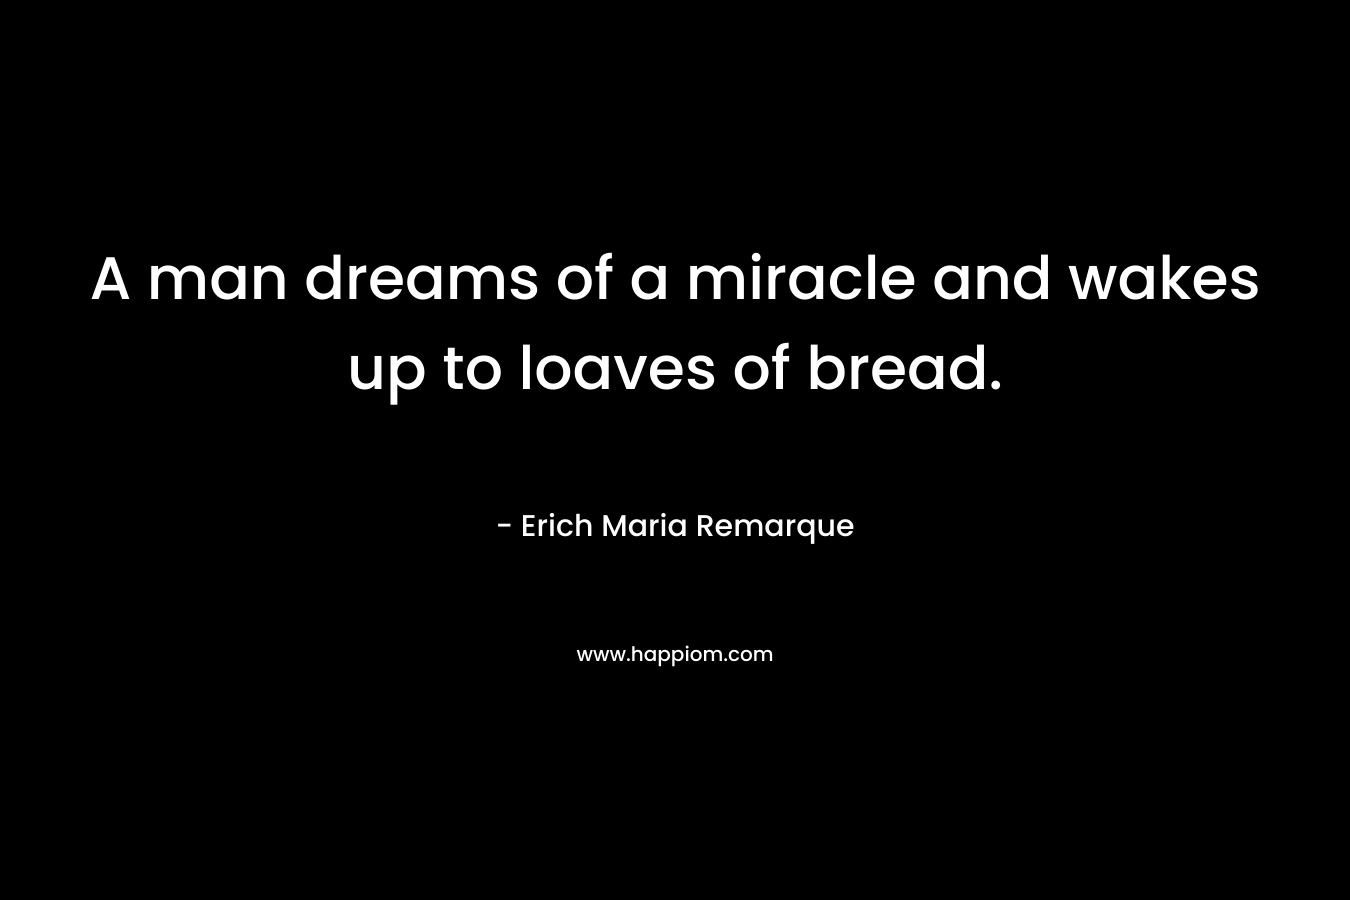 A man dreams of a miracle and wakes up to loaves of bread. – Erich Maria Remarque